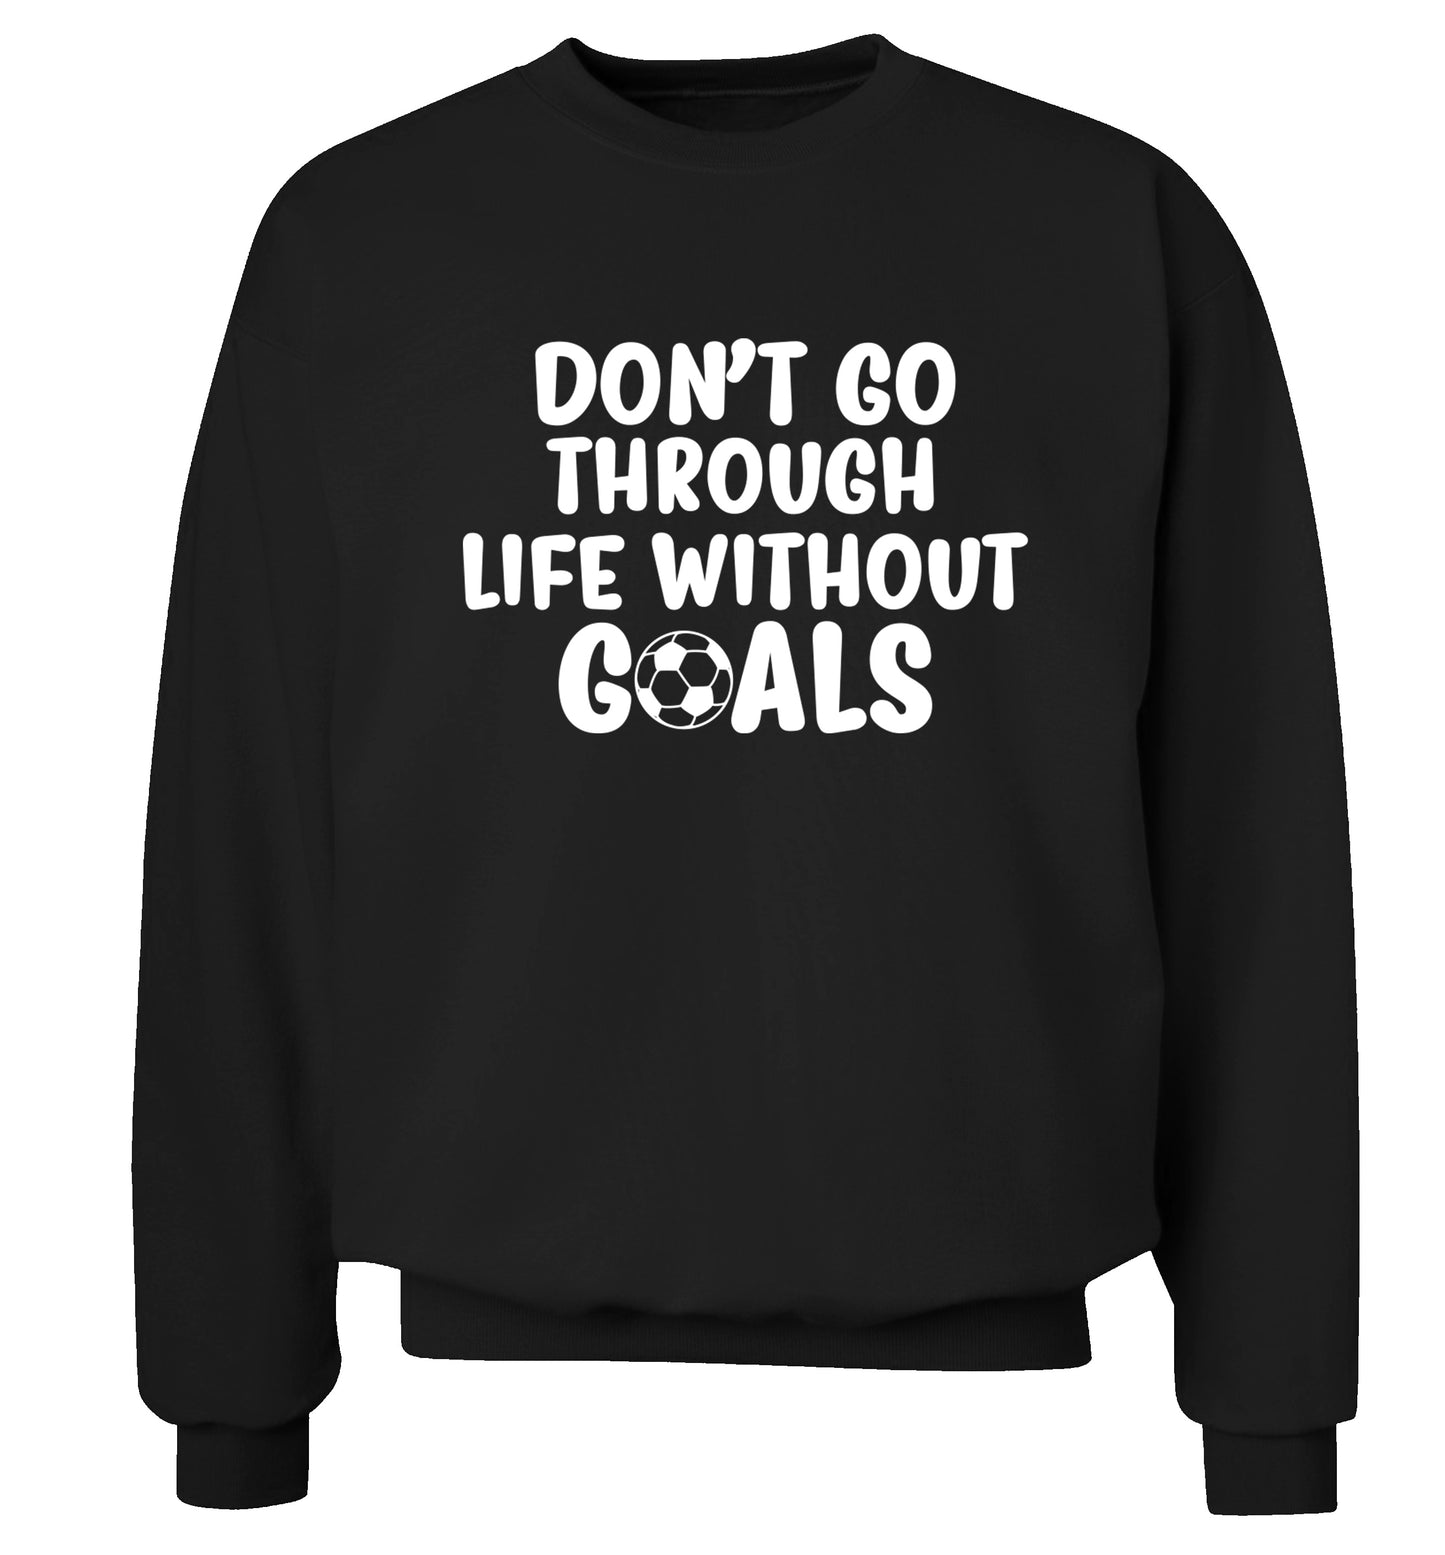 Don't go through life without goals Adult's unisexblack Sweater 2XL